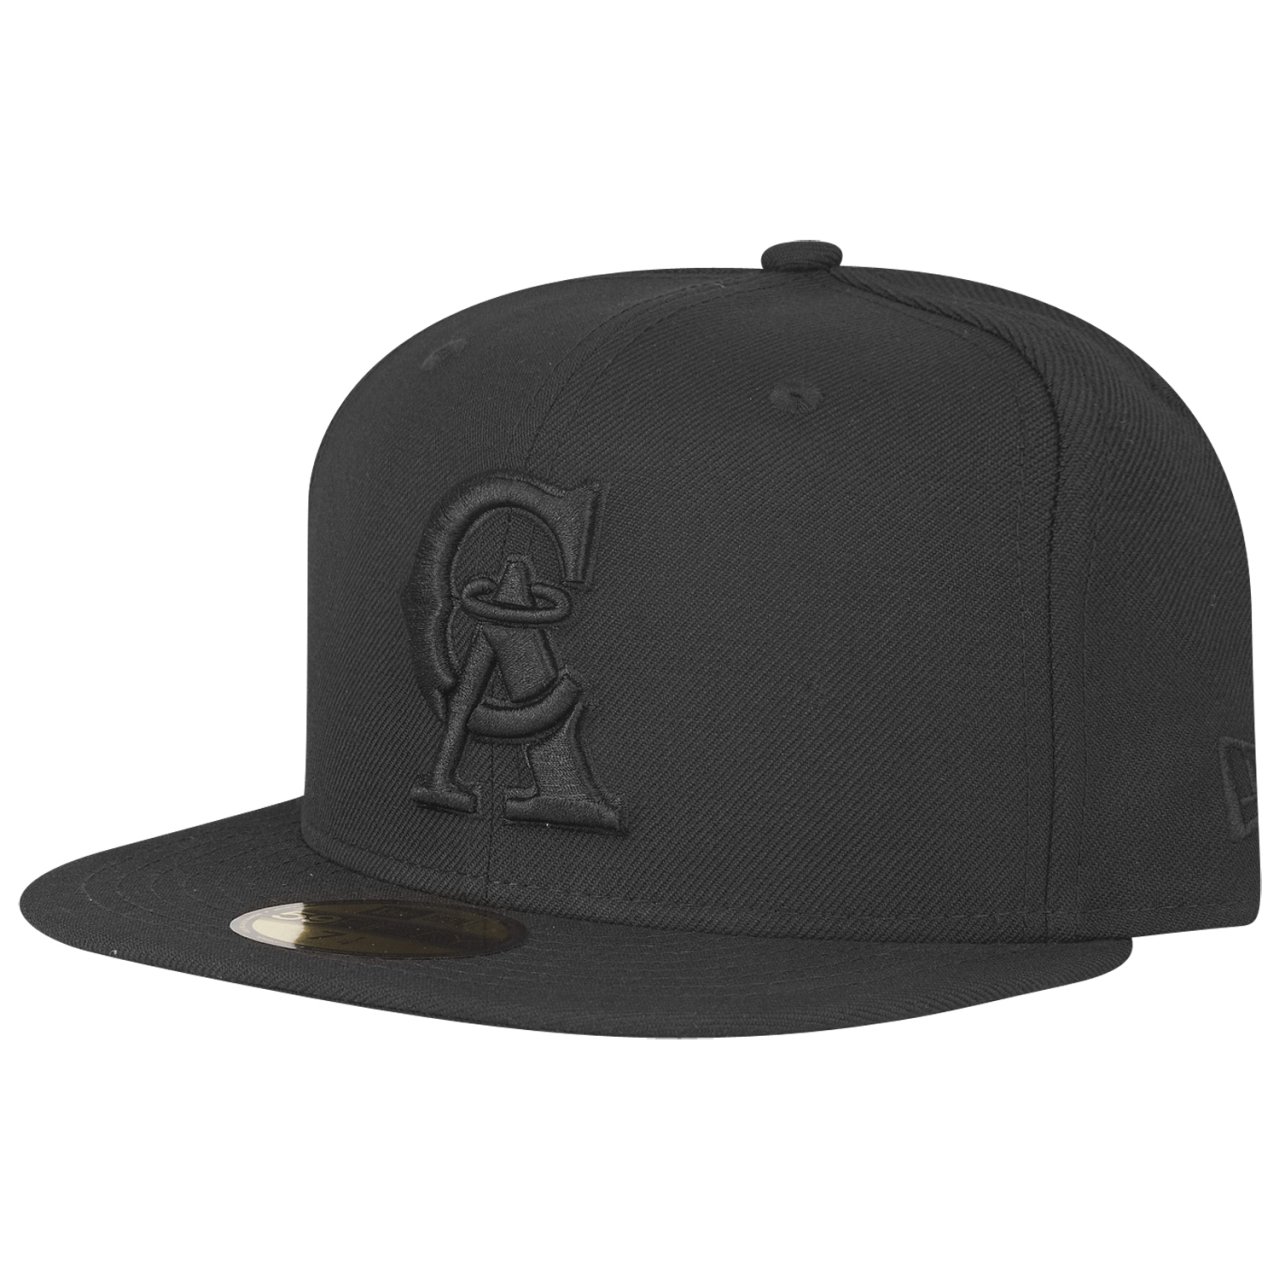 New Era 59Fifty Cap MLB BLACK California Angels Cooperstown | Fitted ...